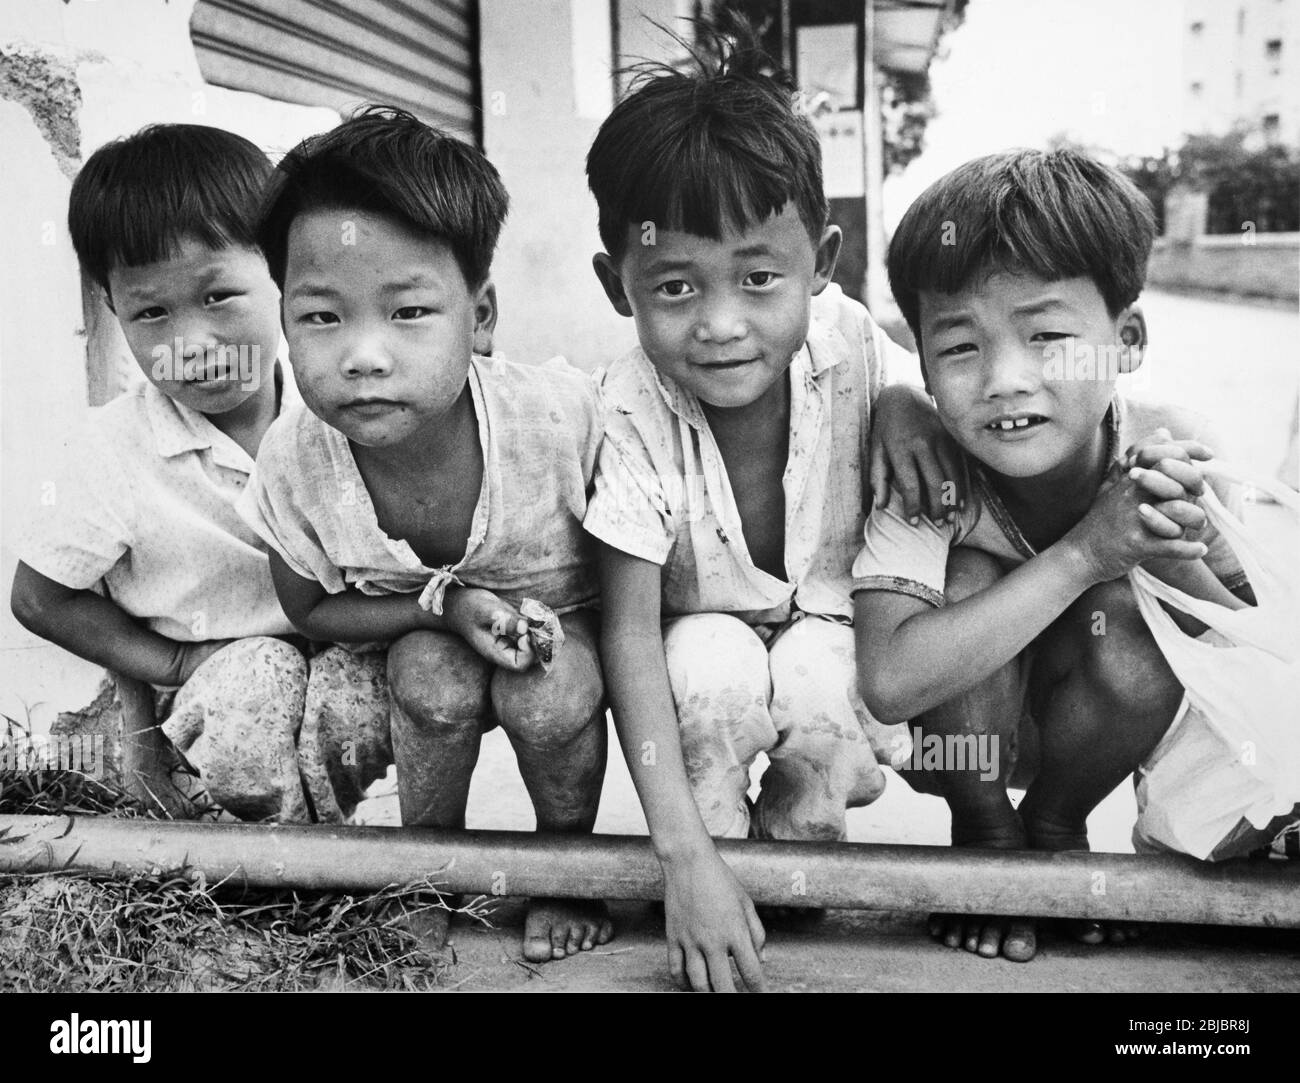 Hong Kong October 1986 Village children in Ping Yeung. The picture is is part of a collection of photographs taken in Hong Kong between September and November, 1986. They represent a snapshot of Daily Life in the Crown Colony eleven years before sovereignty was transferred back to mainland China. Photograph by Howard Walker / Alamy. Stock Photo